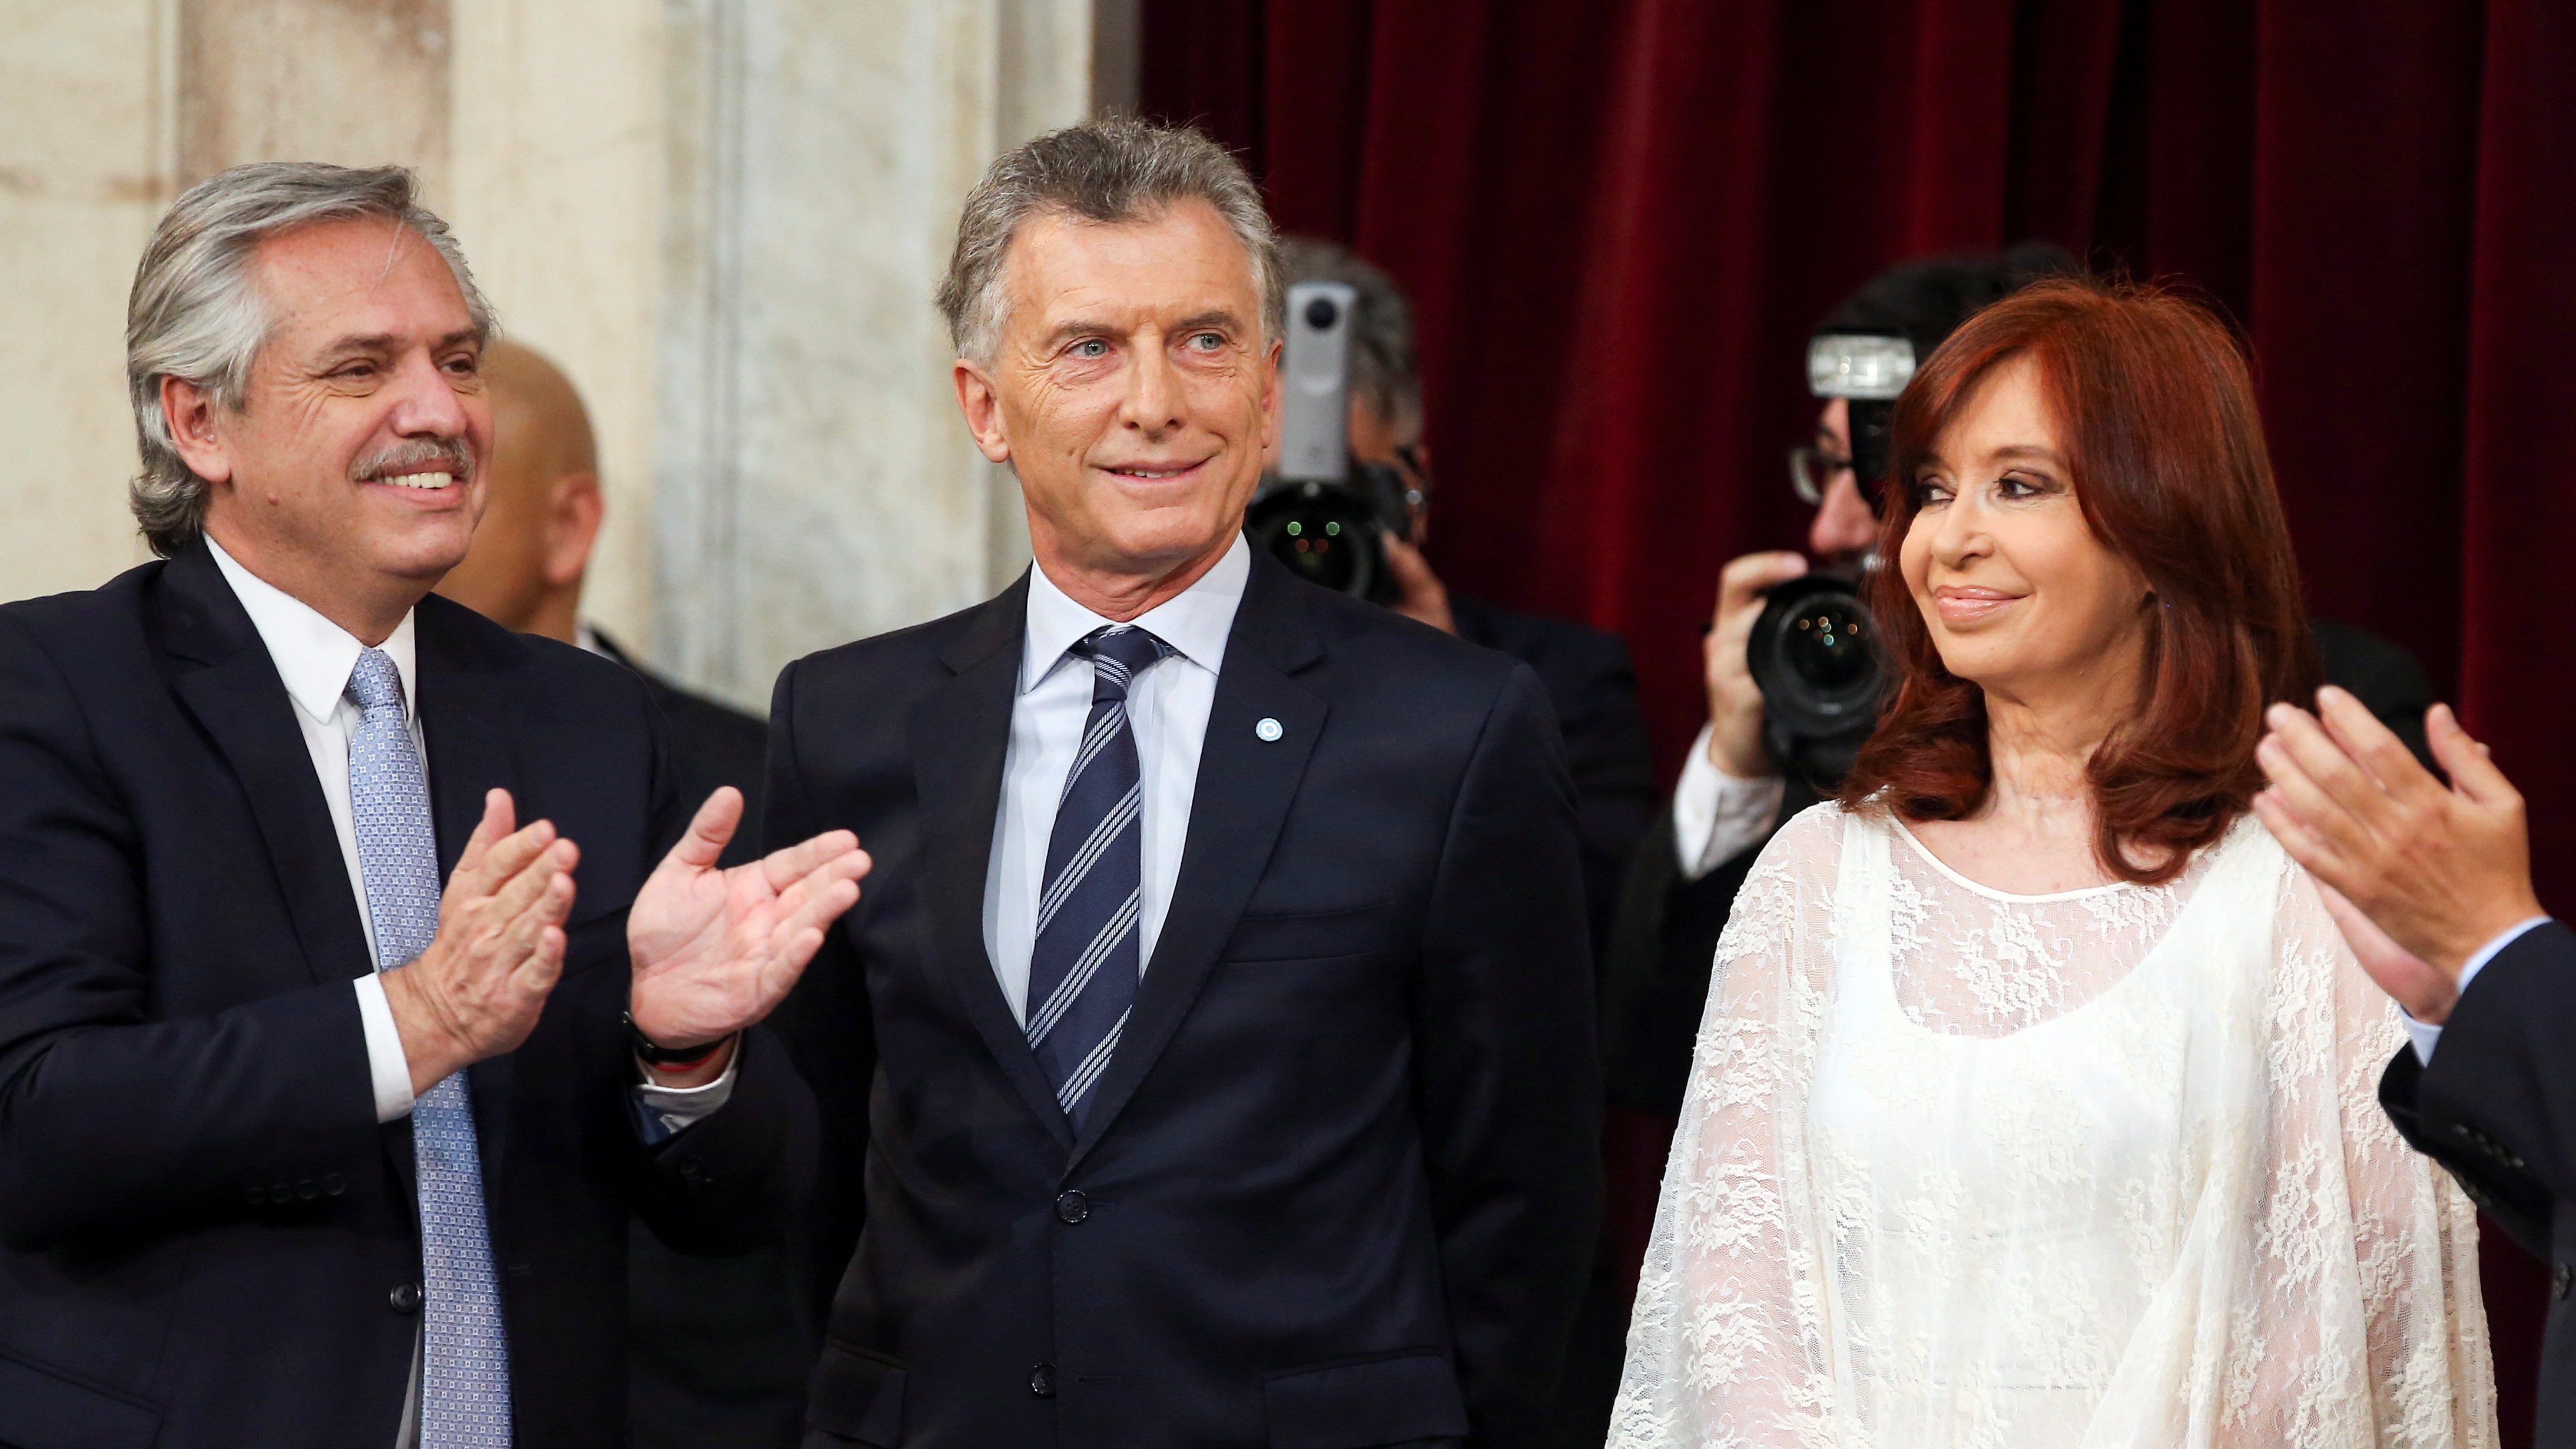 Argentina's President Alberto Fernandez gestures next to Vice President Cristina Fernandez de Kirchner and former Argentina's President Mauricio Macri after he was sworn in, in Buenos Aires, Argentina December 10, 2019. REUTERS/Agustin Marcarian